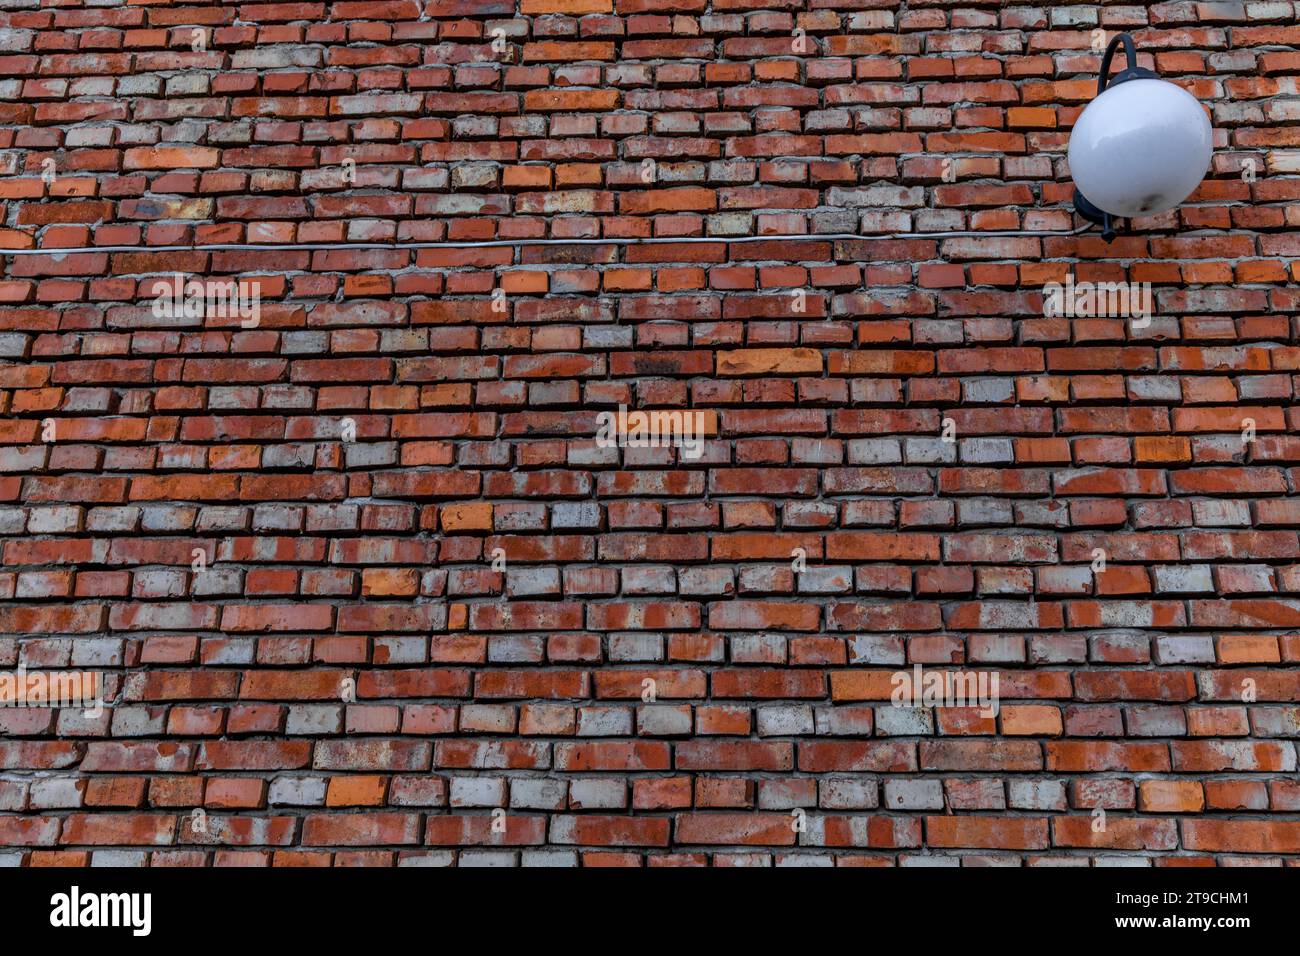 Old red brick facade with a white suspended lamp, building in need of renovation Stock Photo